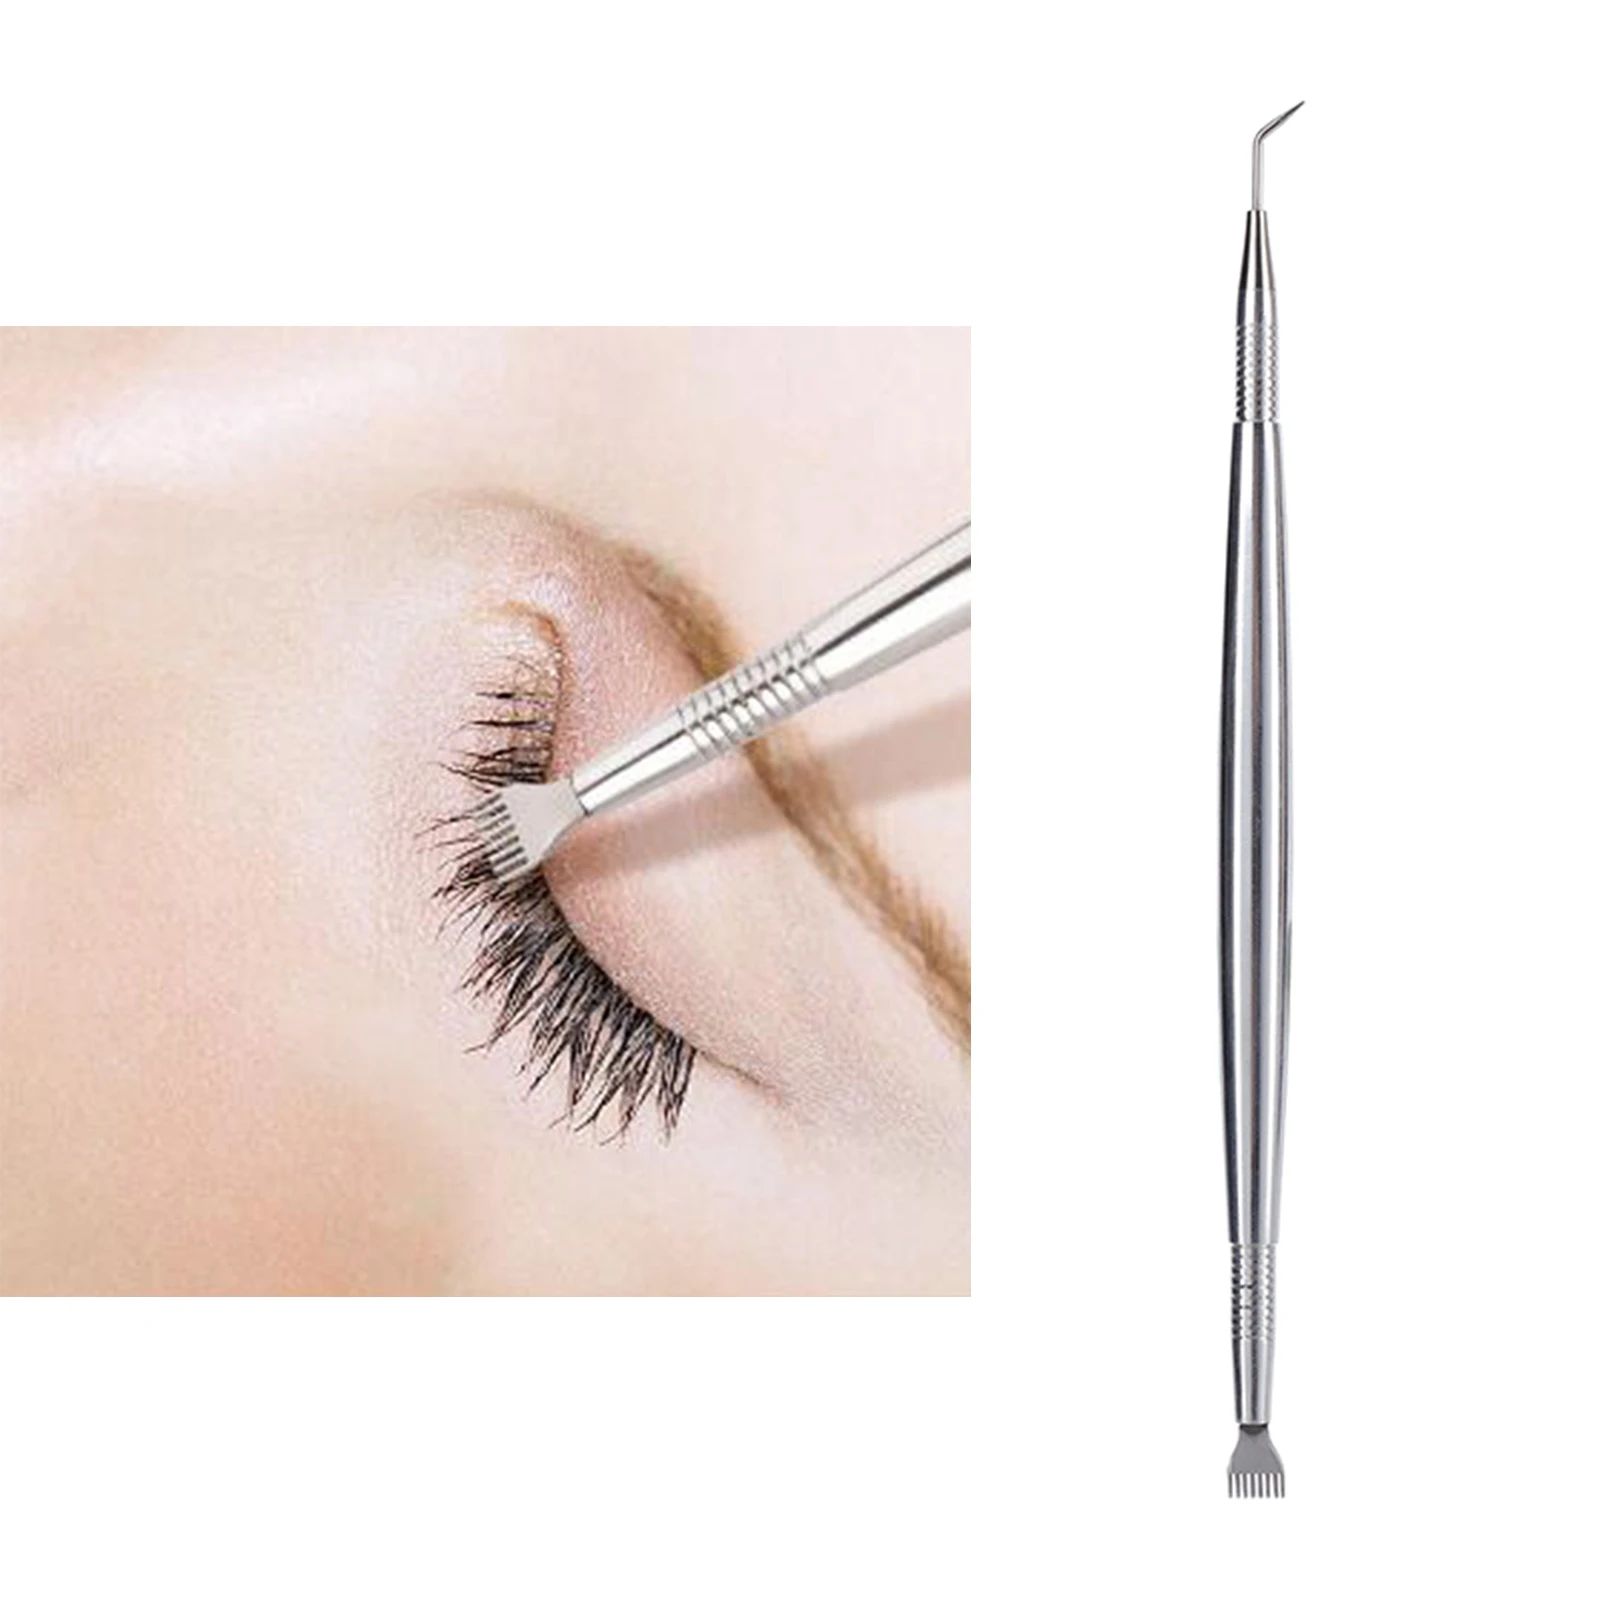 3 in 1 Eyelashes Seperator Perm Tool Tinting Lifter for Beginner Stainless Steel